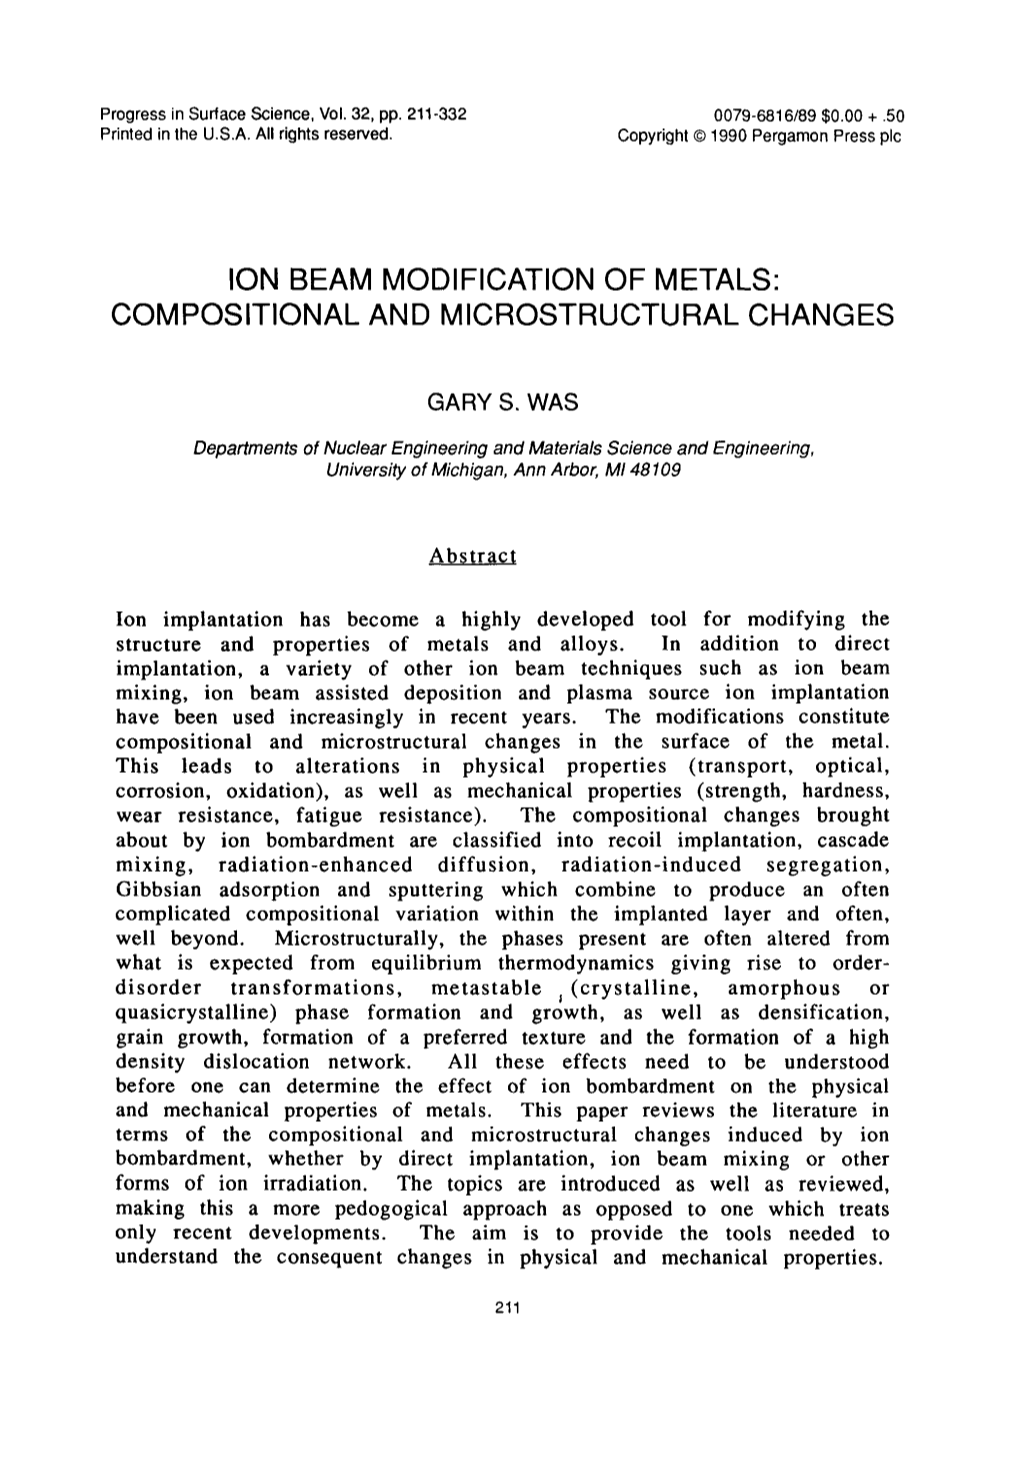 Ion Beam Modification of Metals: Compositional and Microstructural Changes